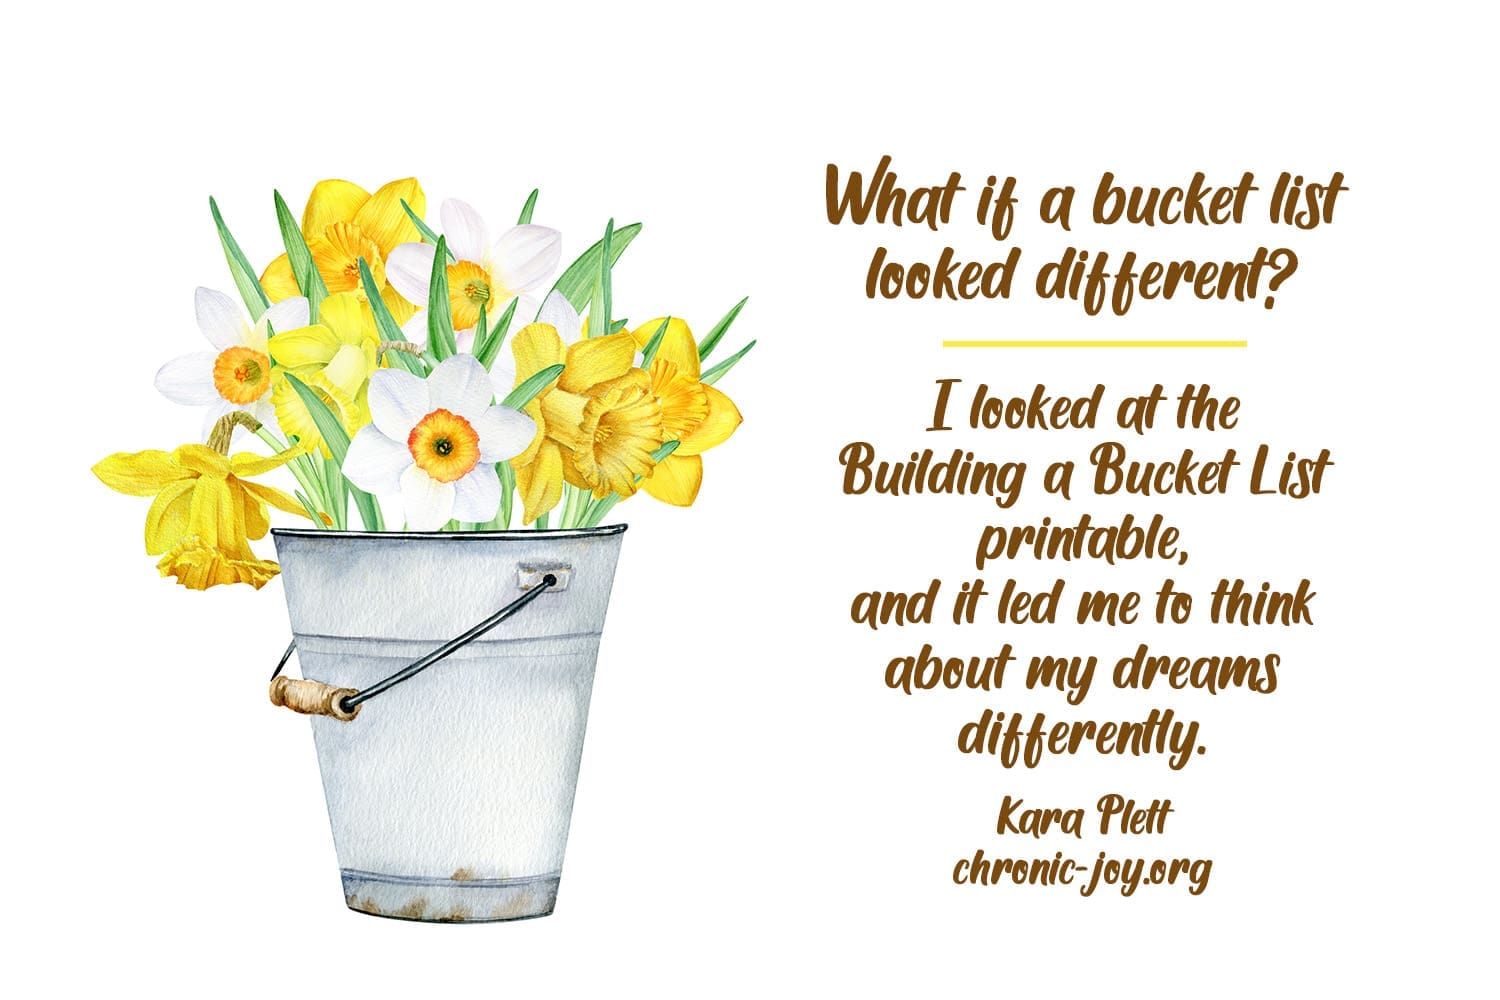 "What if a bucket list looked different? I looked at the Building a Bucket List printable, and it led me to think about my dreams differently." Kara Plett